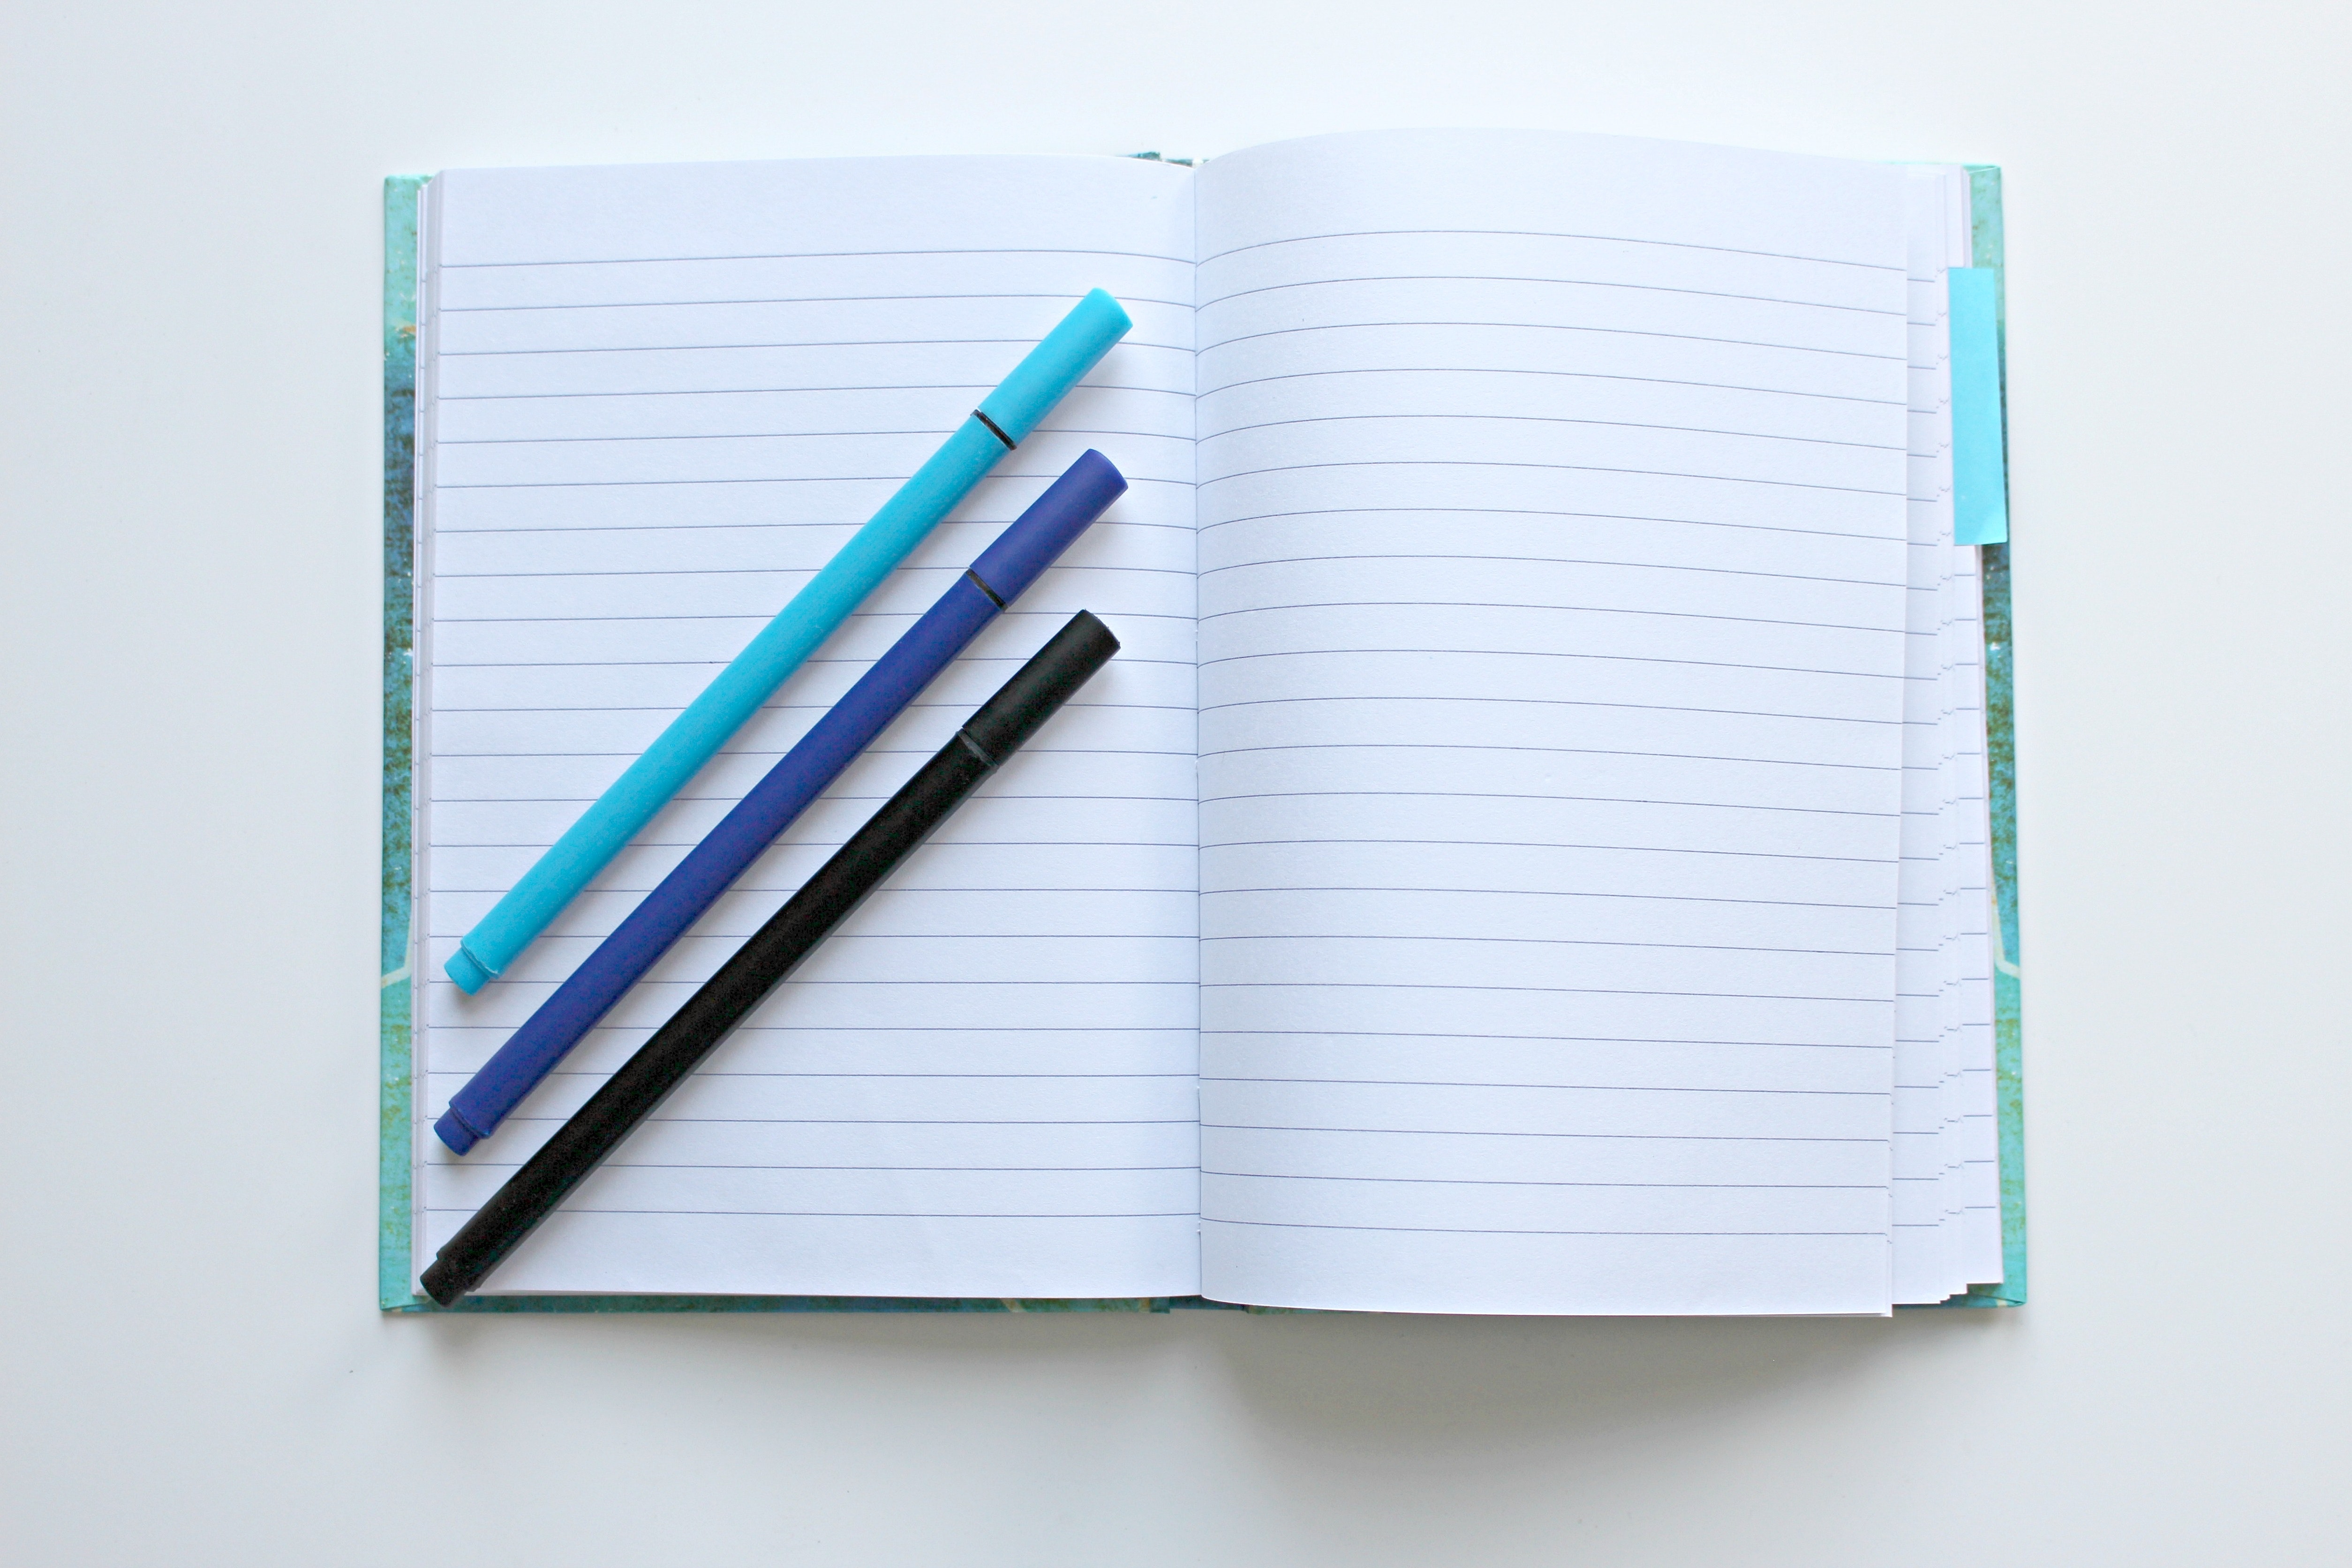 An open notebook and three markers